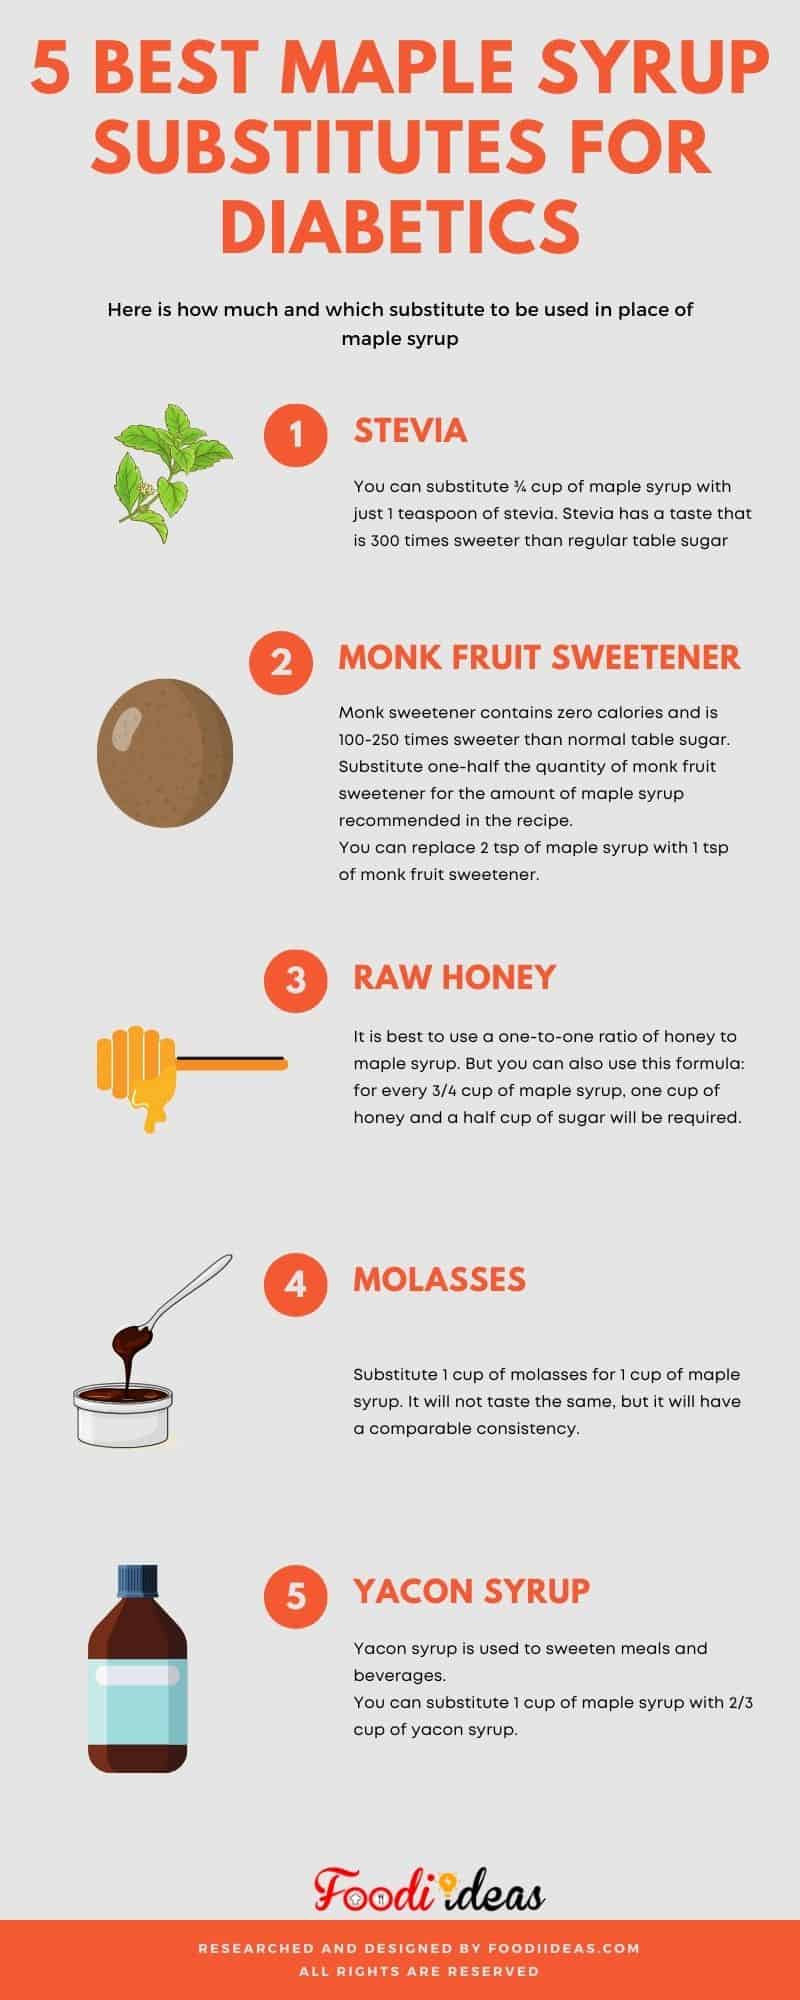 5 best maple syrup substitutes for diabetics